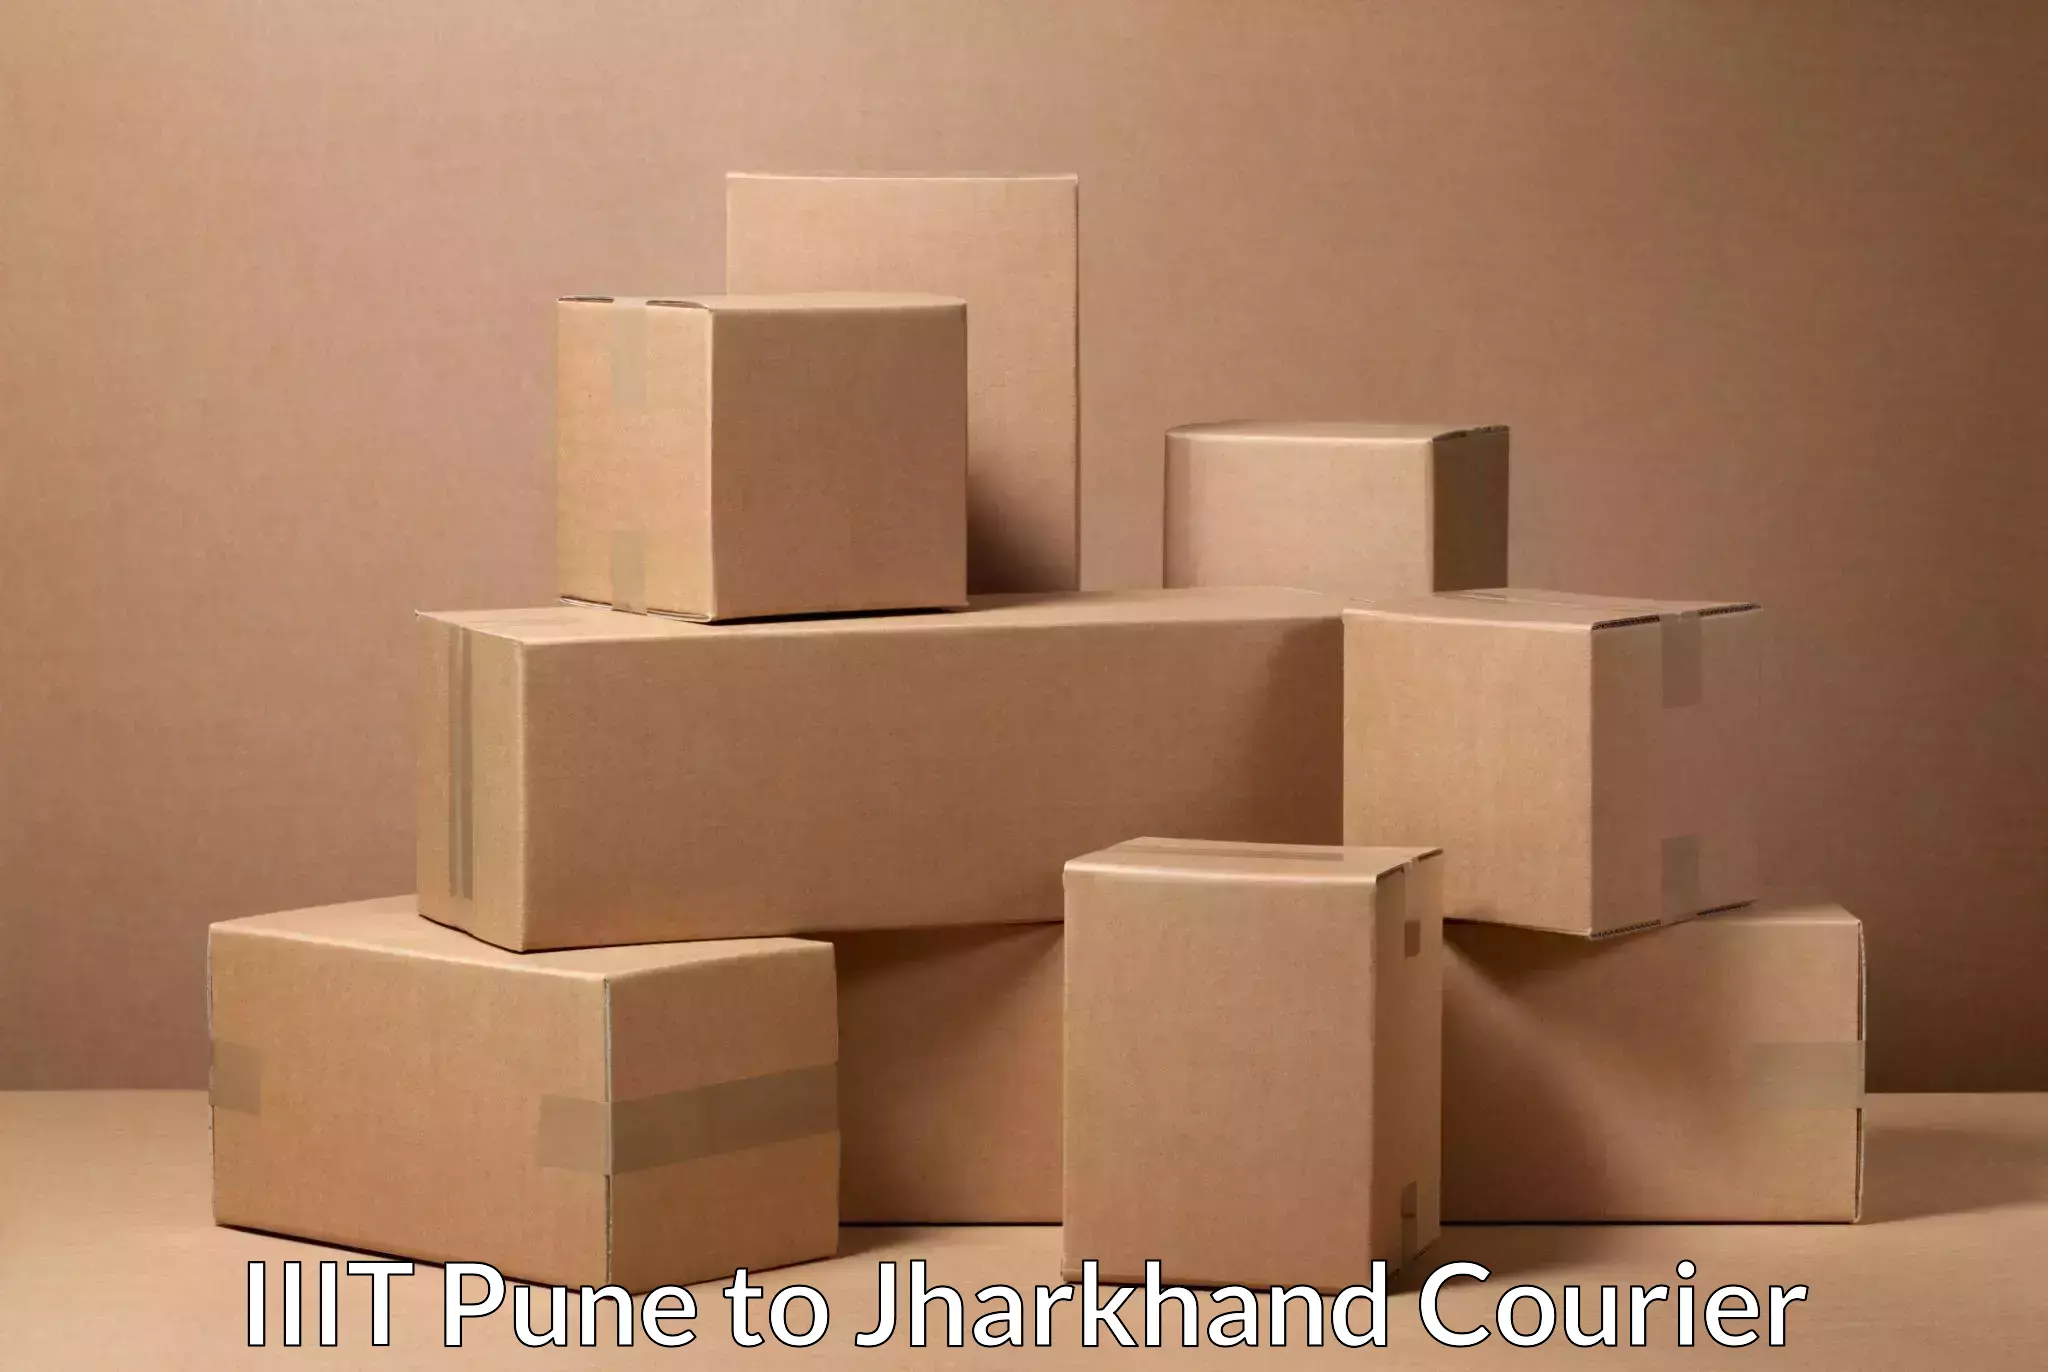 Supply chain efficiency IIIT Pune to Jharkhand